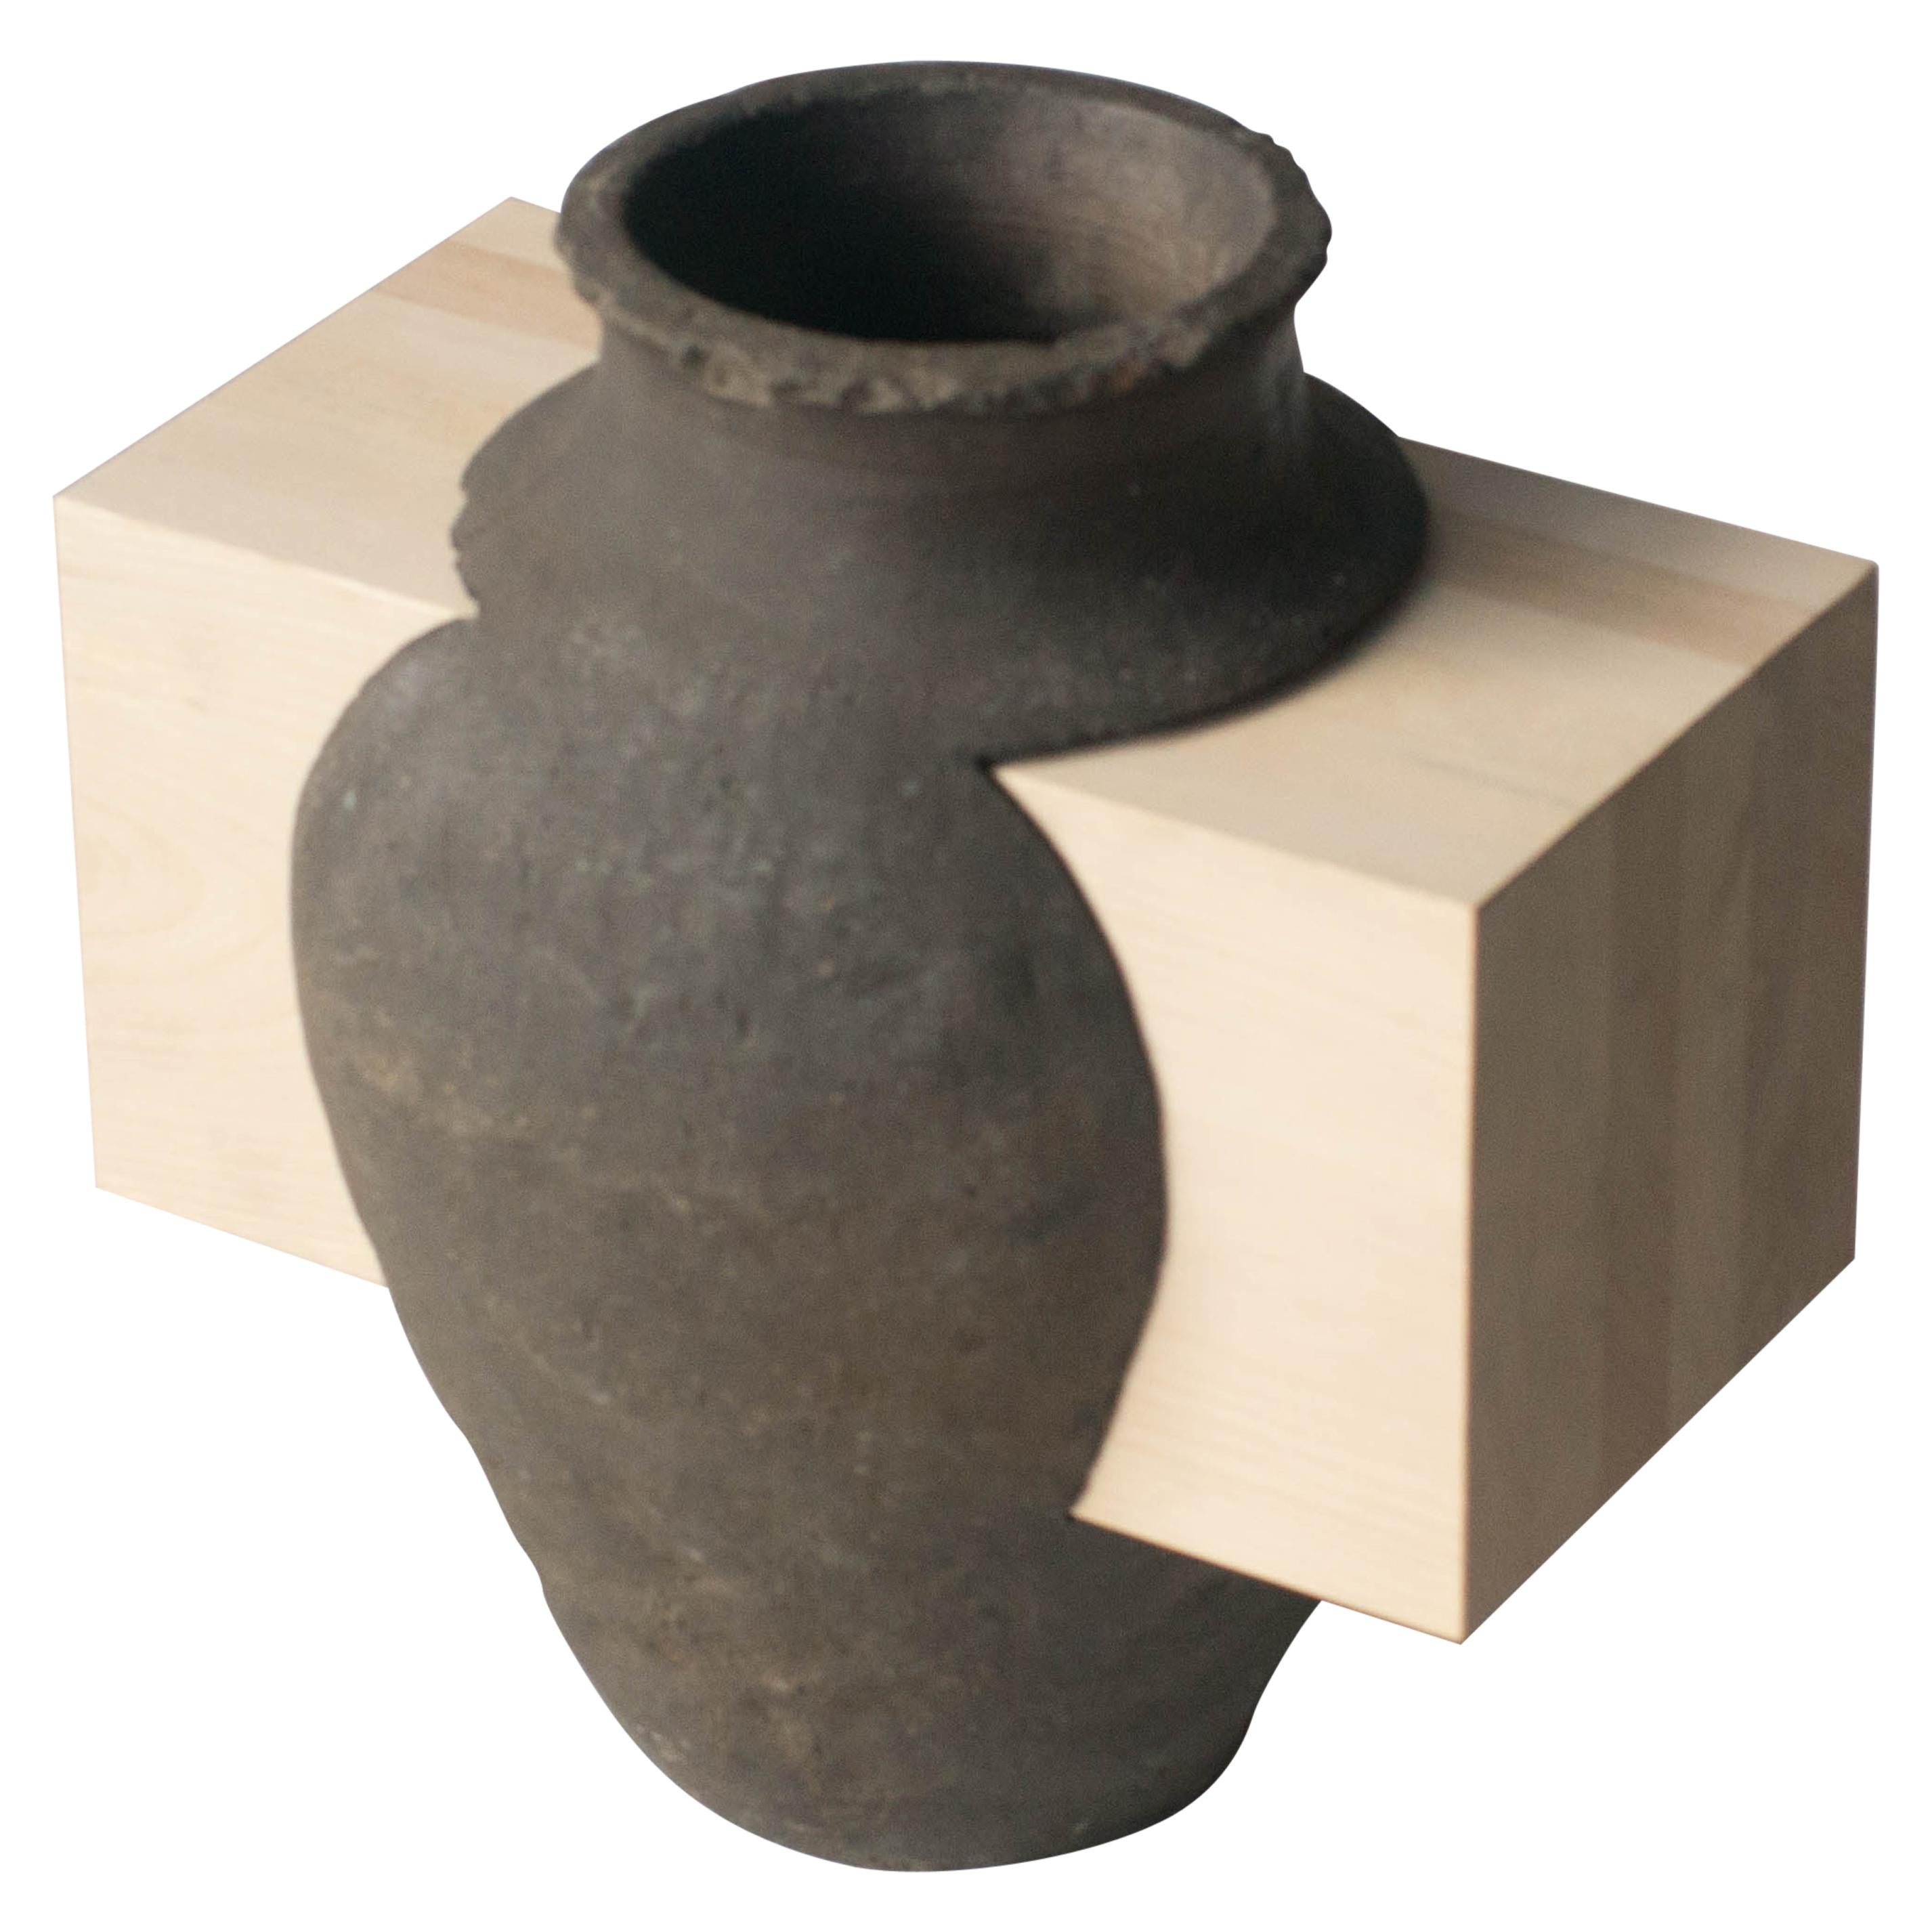 Pot and Wood Abstract Sculpture Contemporary Zen Japonism Style